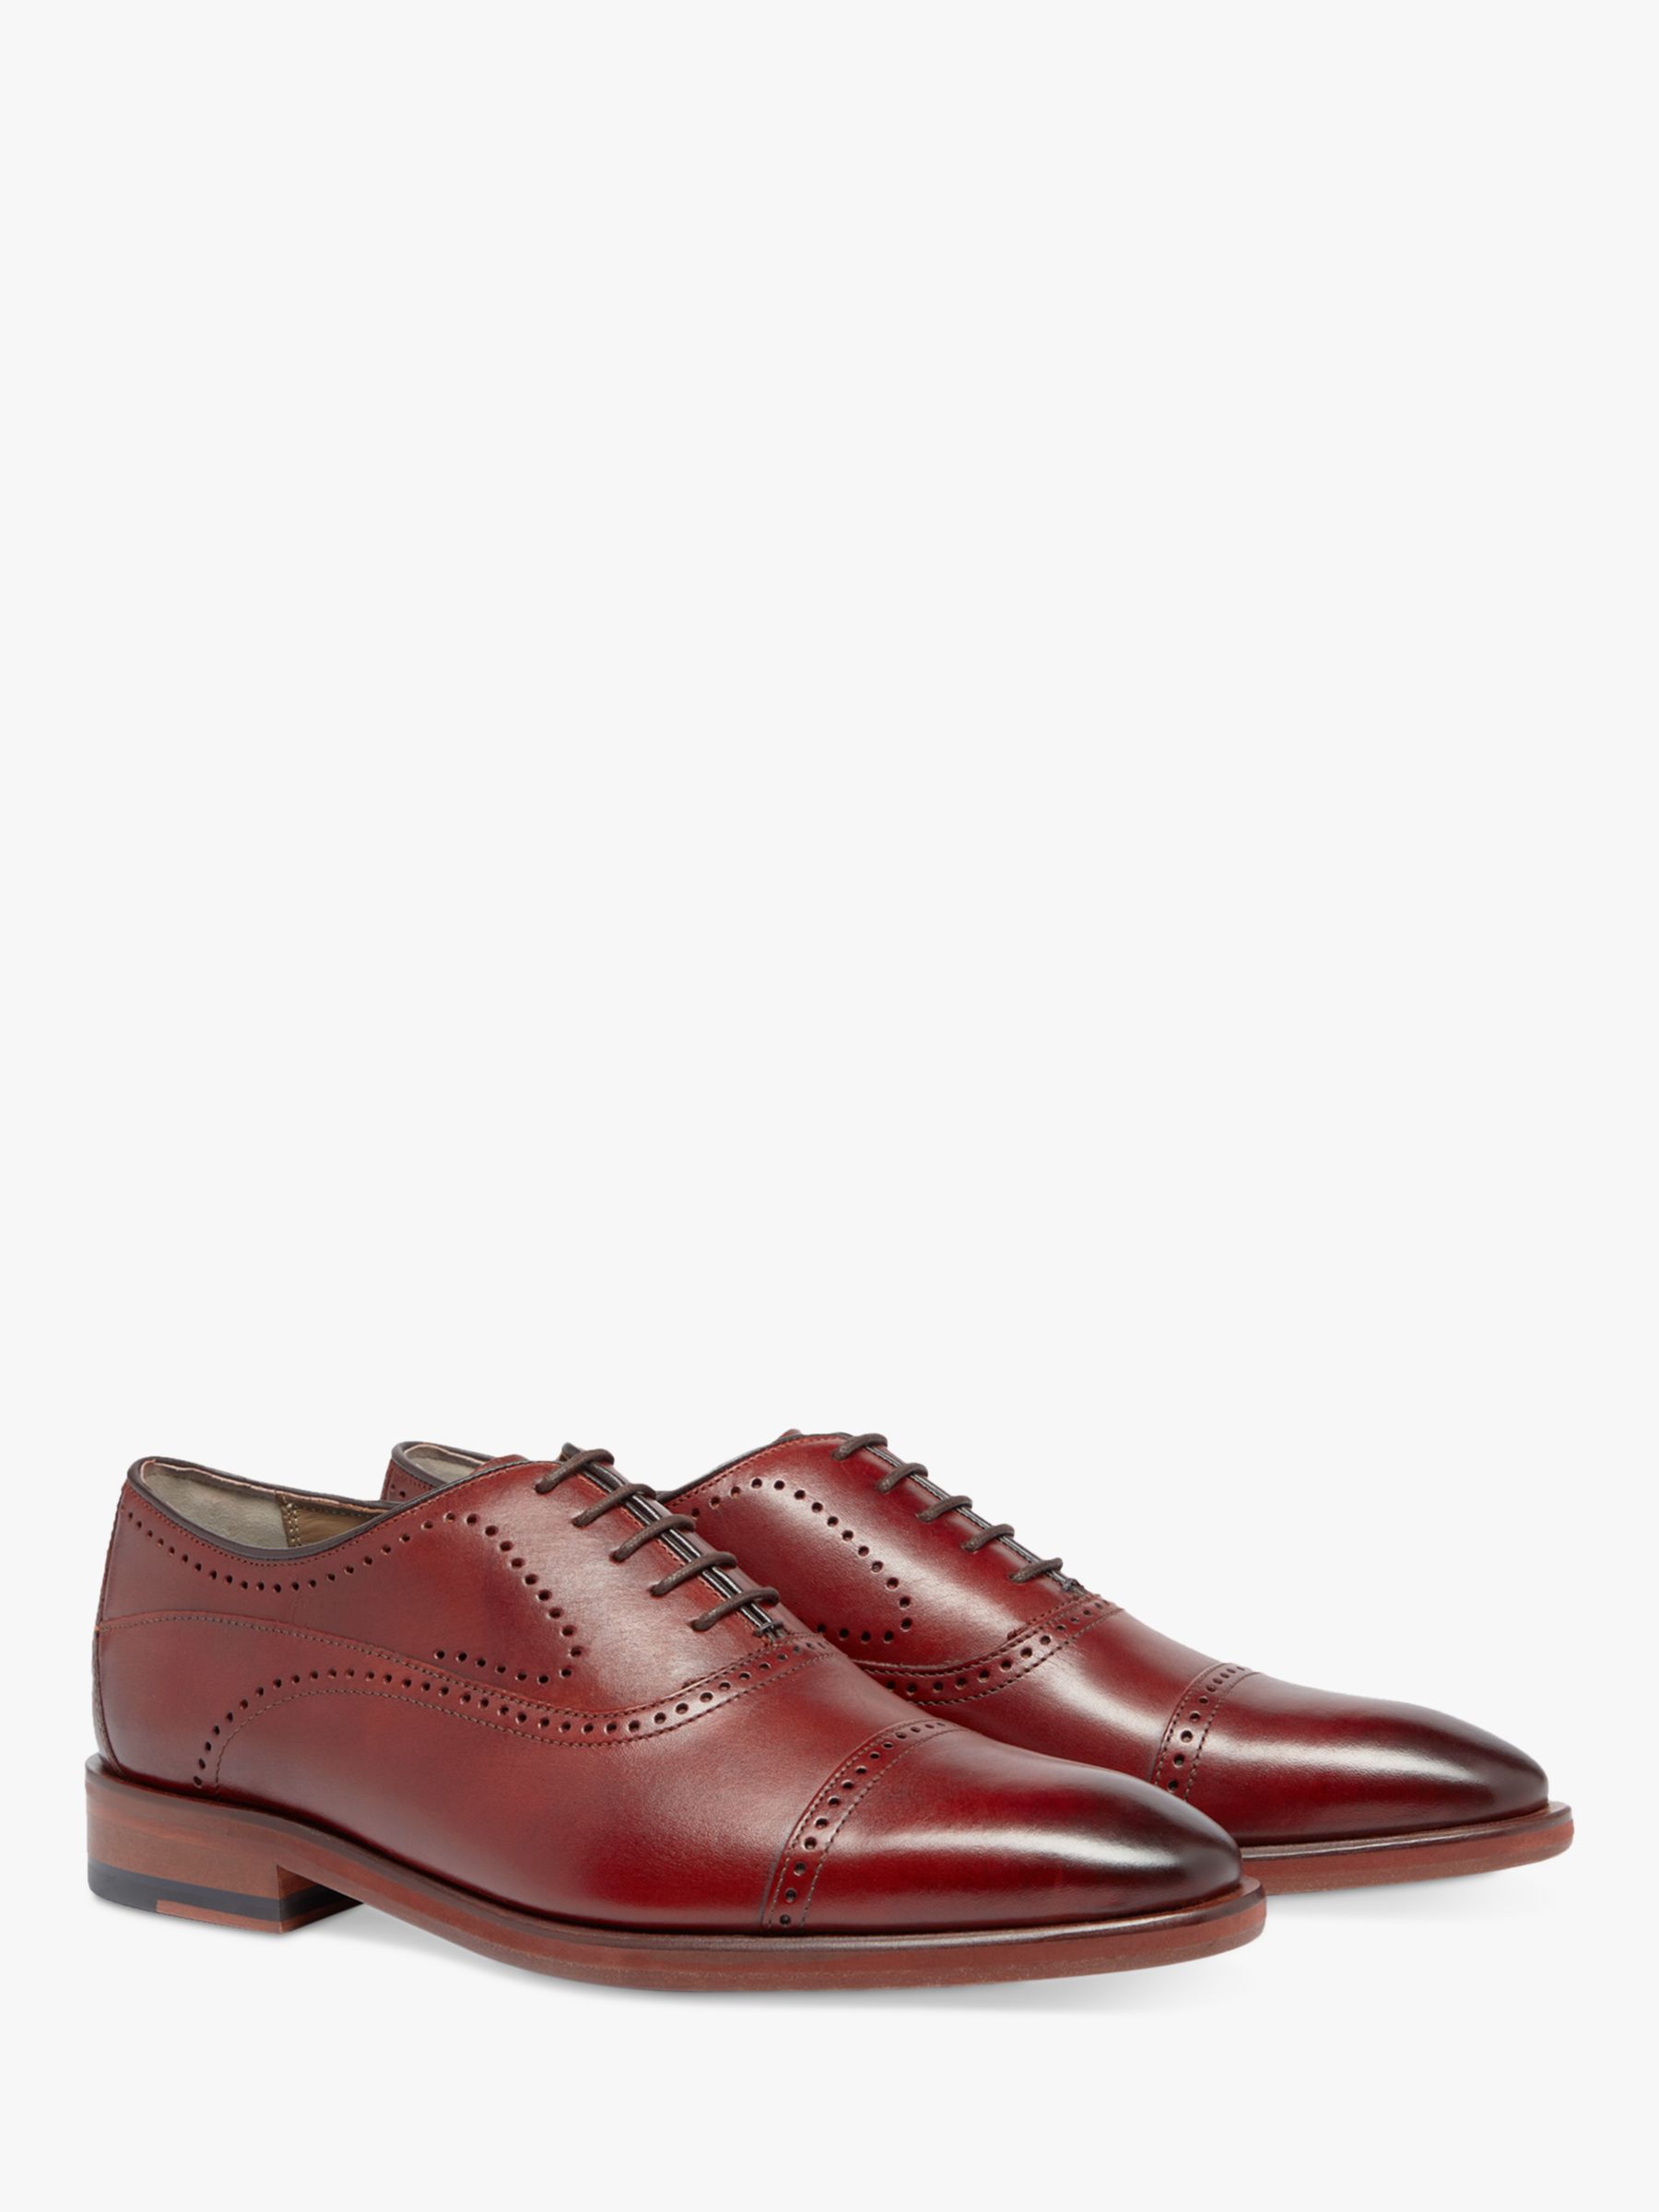 cheap oliver sweeney shoes